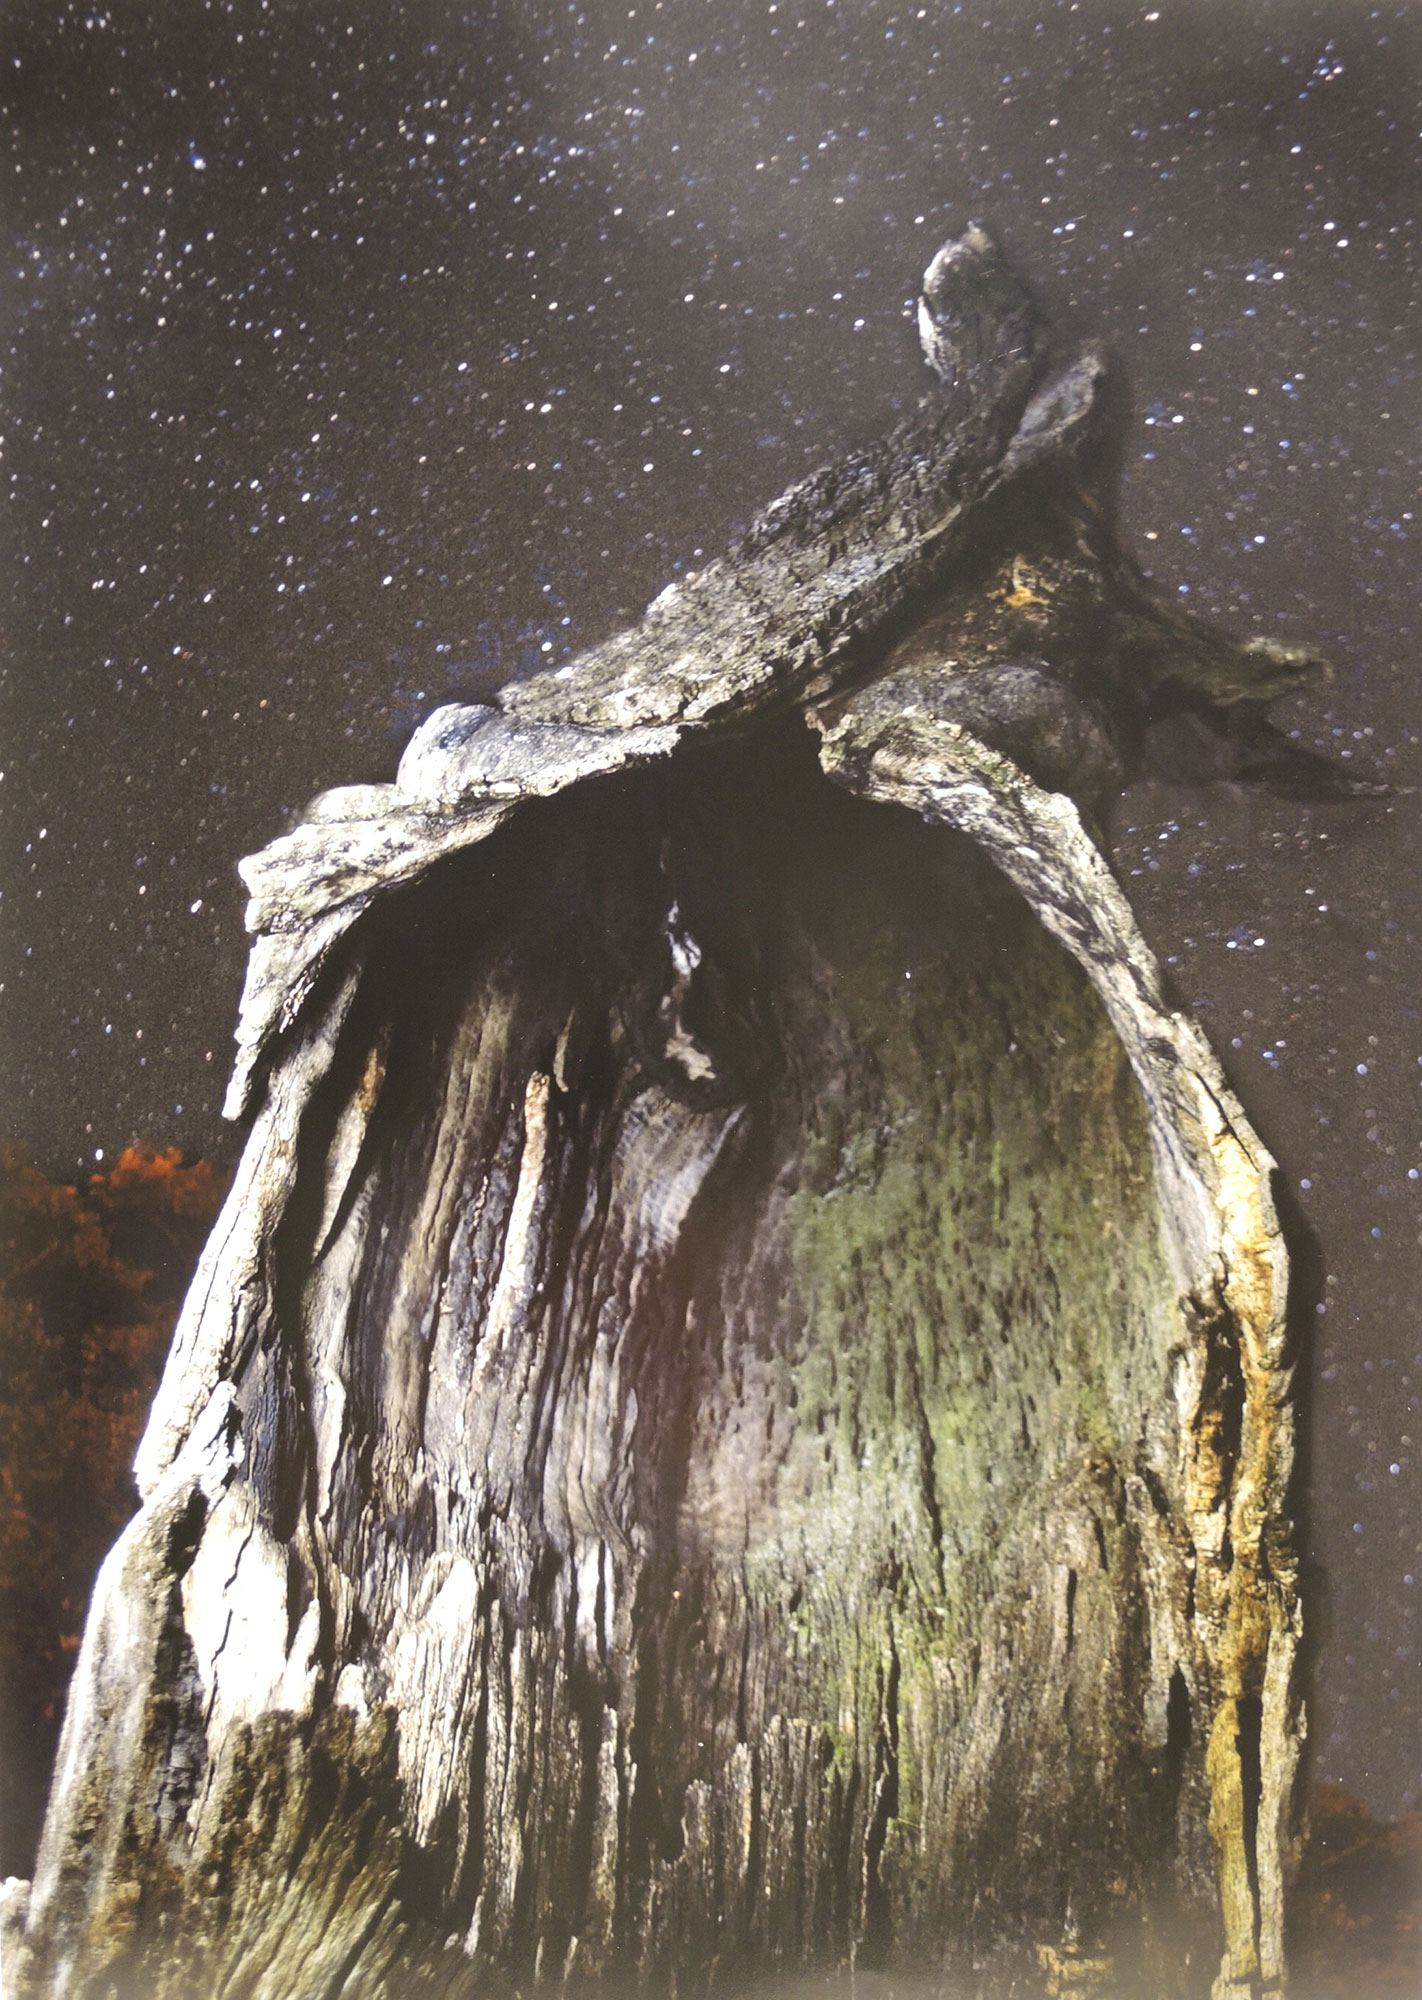 A photograph by Gabrielle Robinson of a tree trunk on a starry night